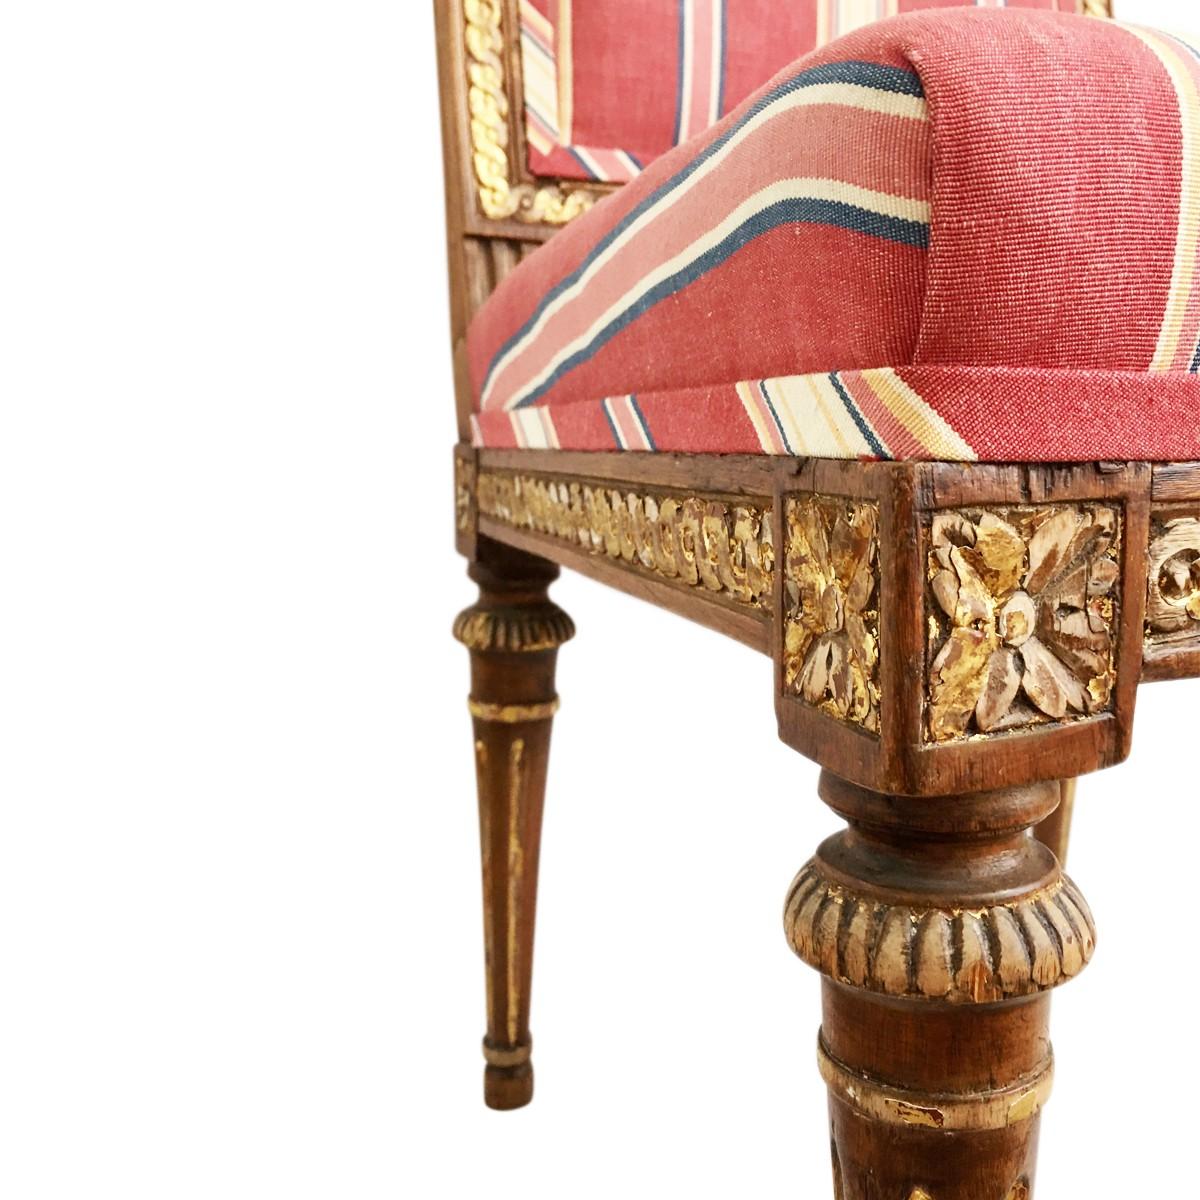 Upholstery Lee Radziwill Gustavian Parcel-Gilt Jospeh Ruste Style Accent Chair, Stockholm